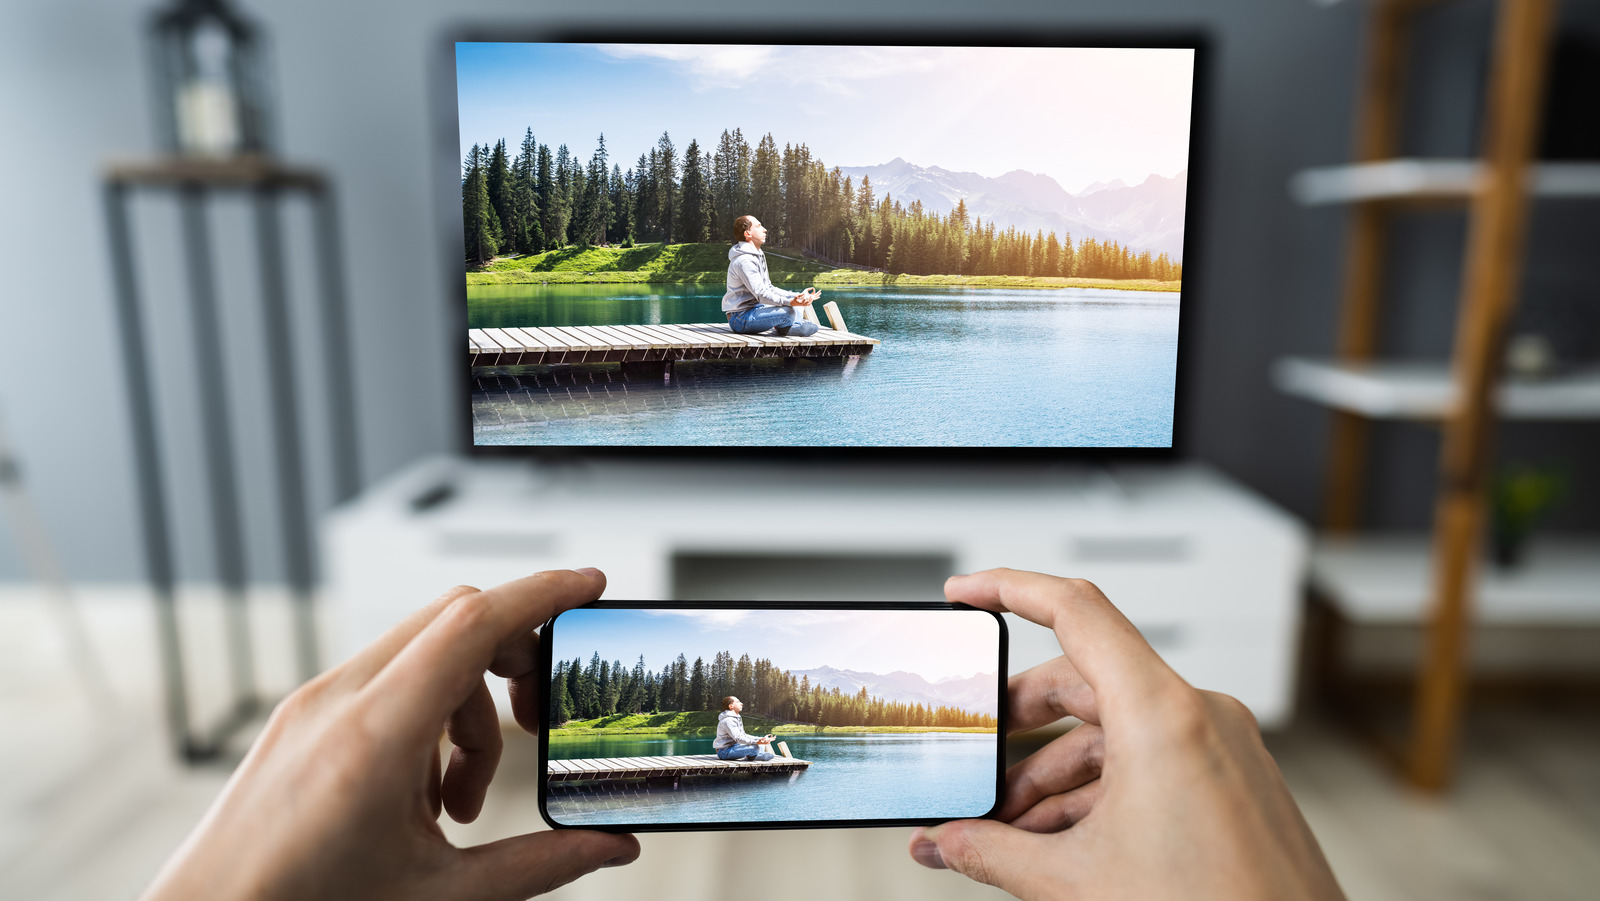 How To Watch Phone Video On TV